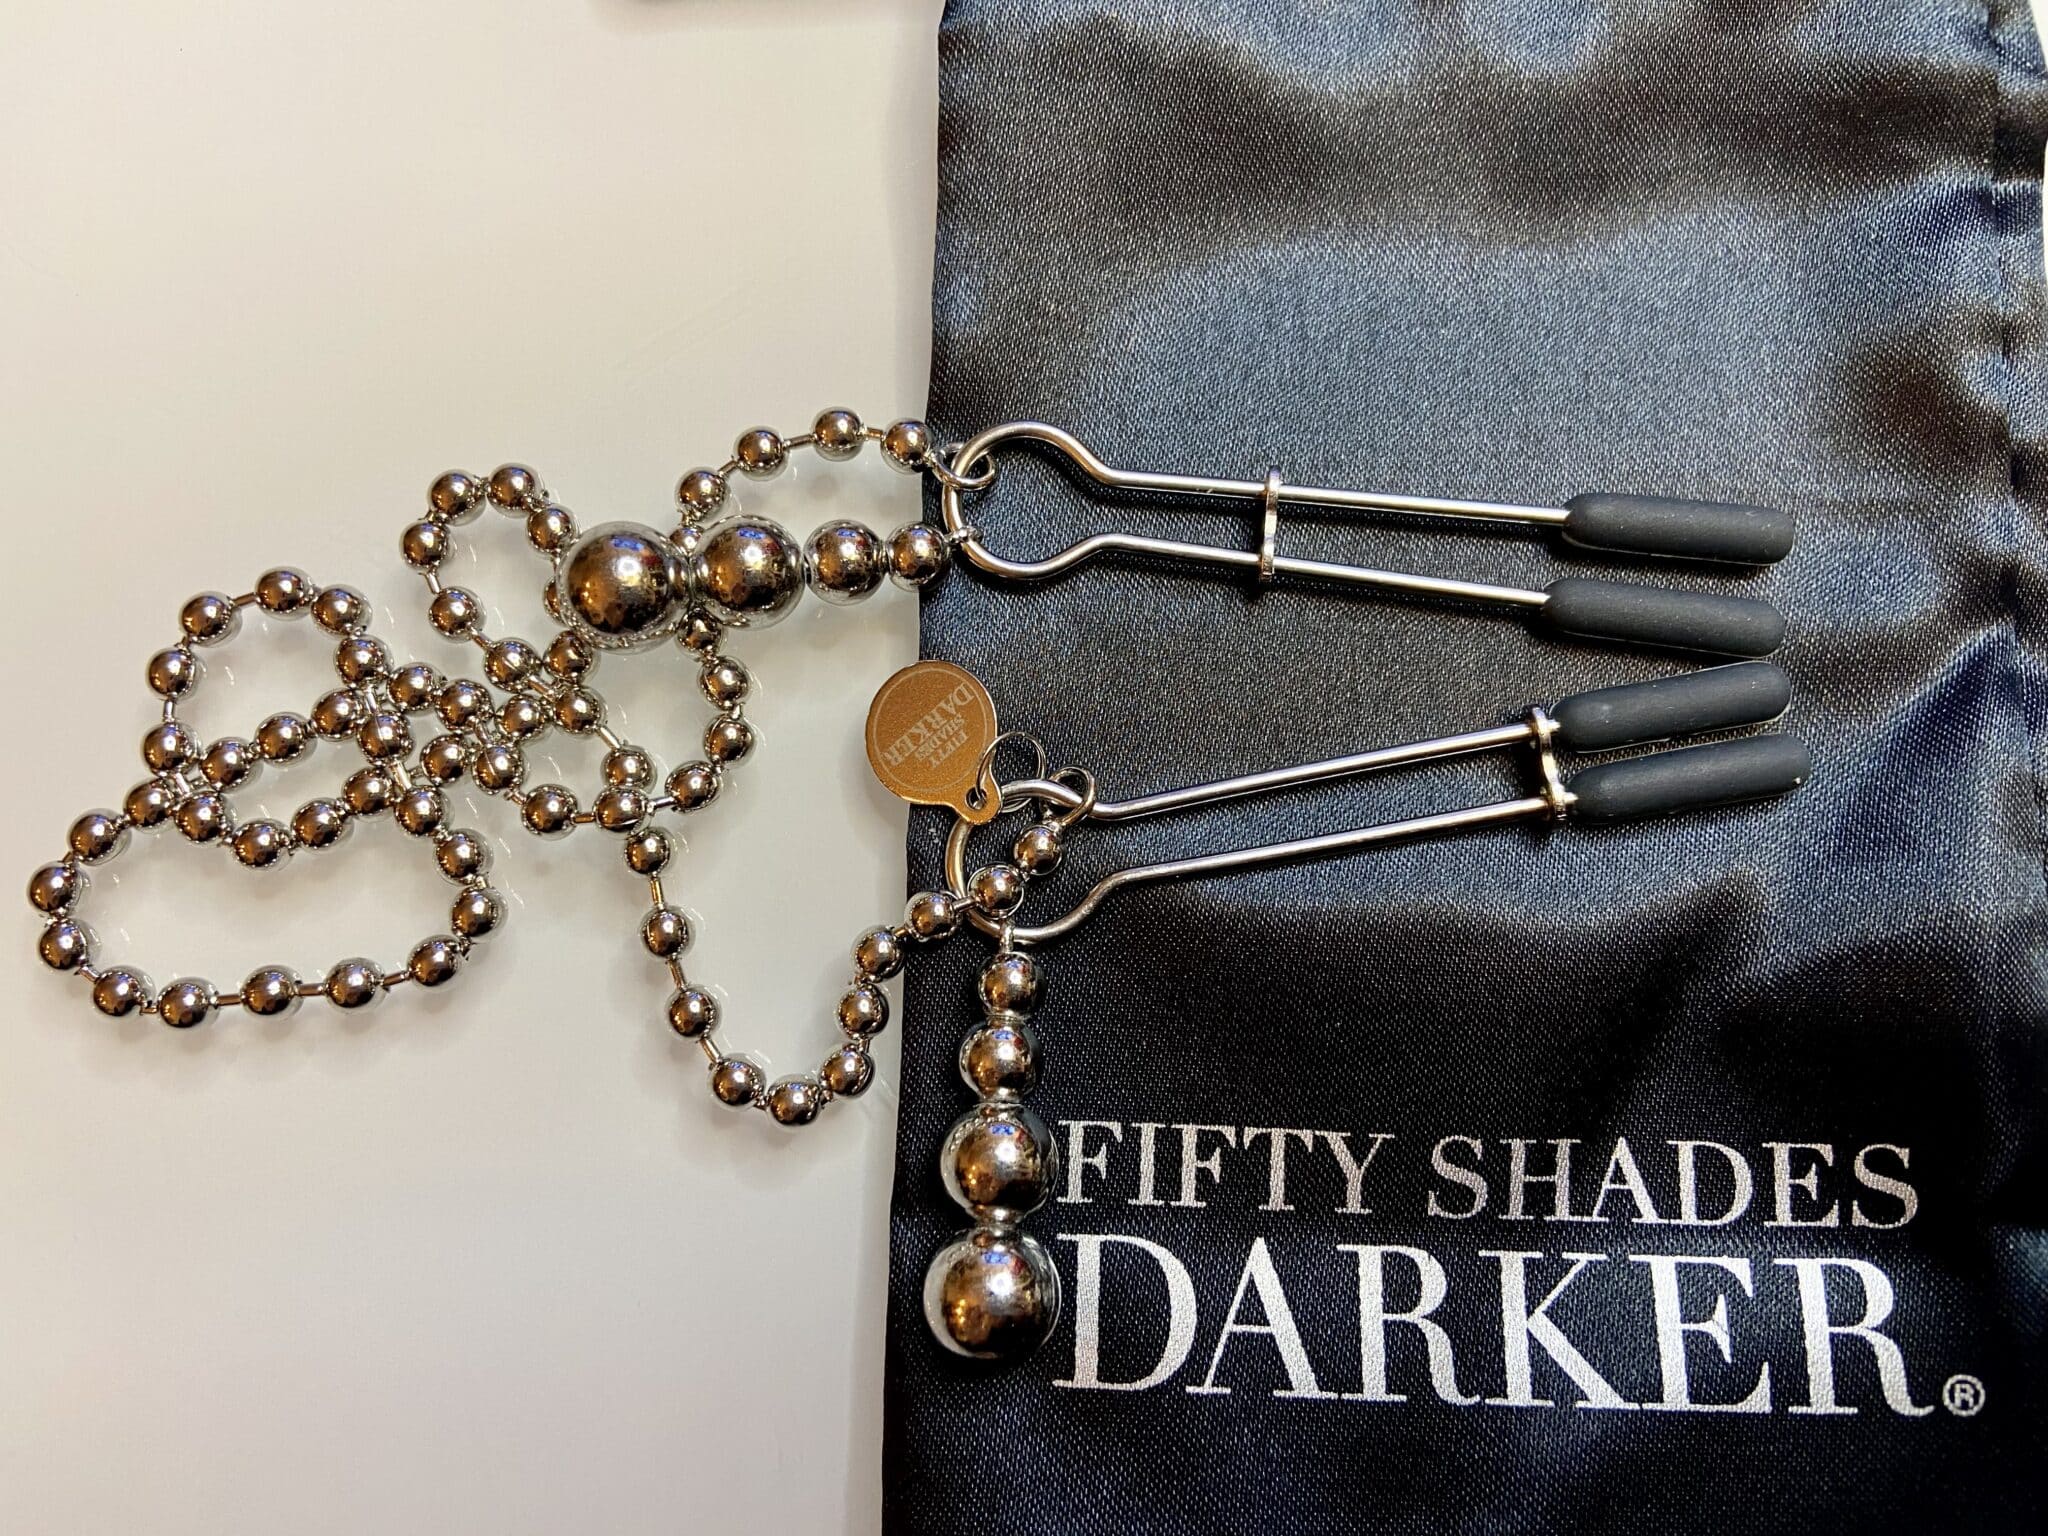 Fifty Shades Darker At My Mercy Chained Nipple Toys. Slide 4